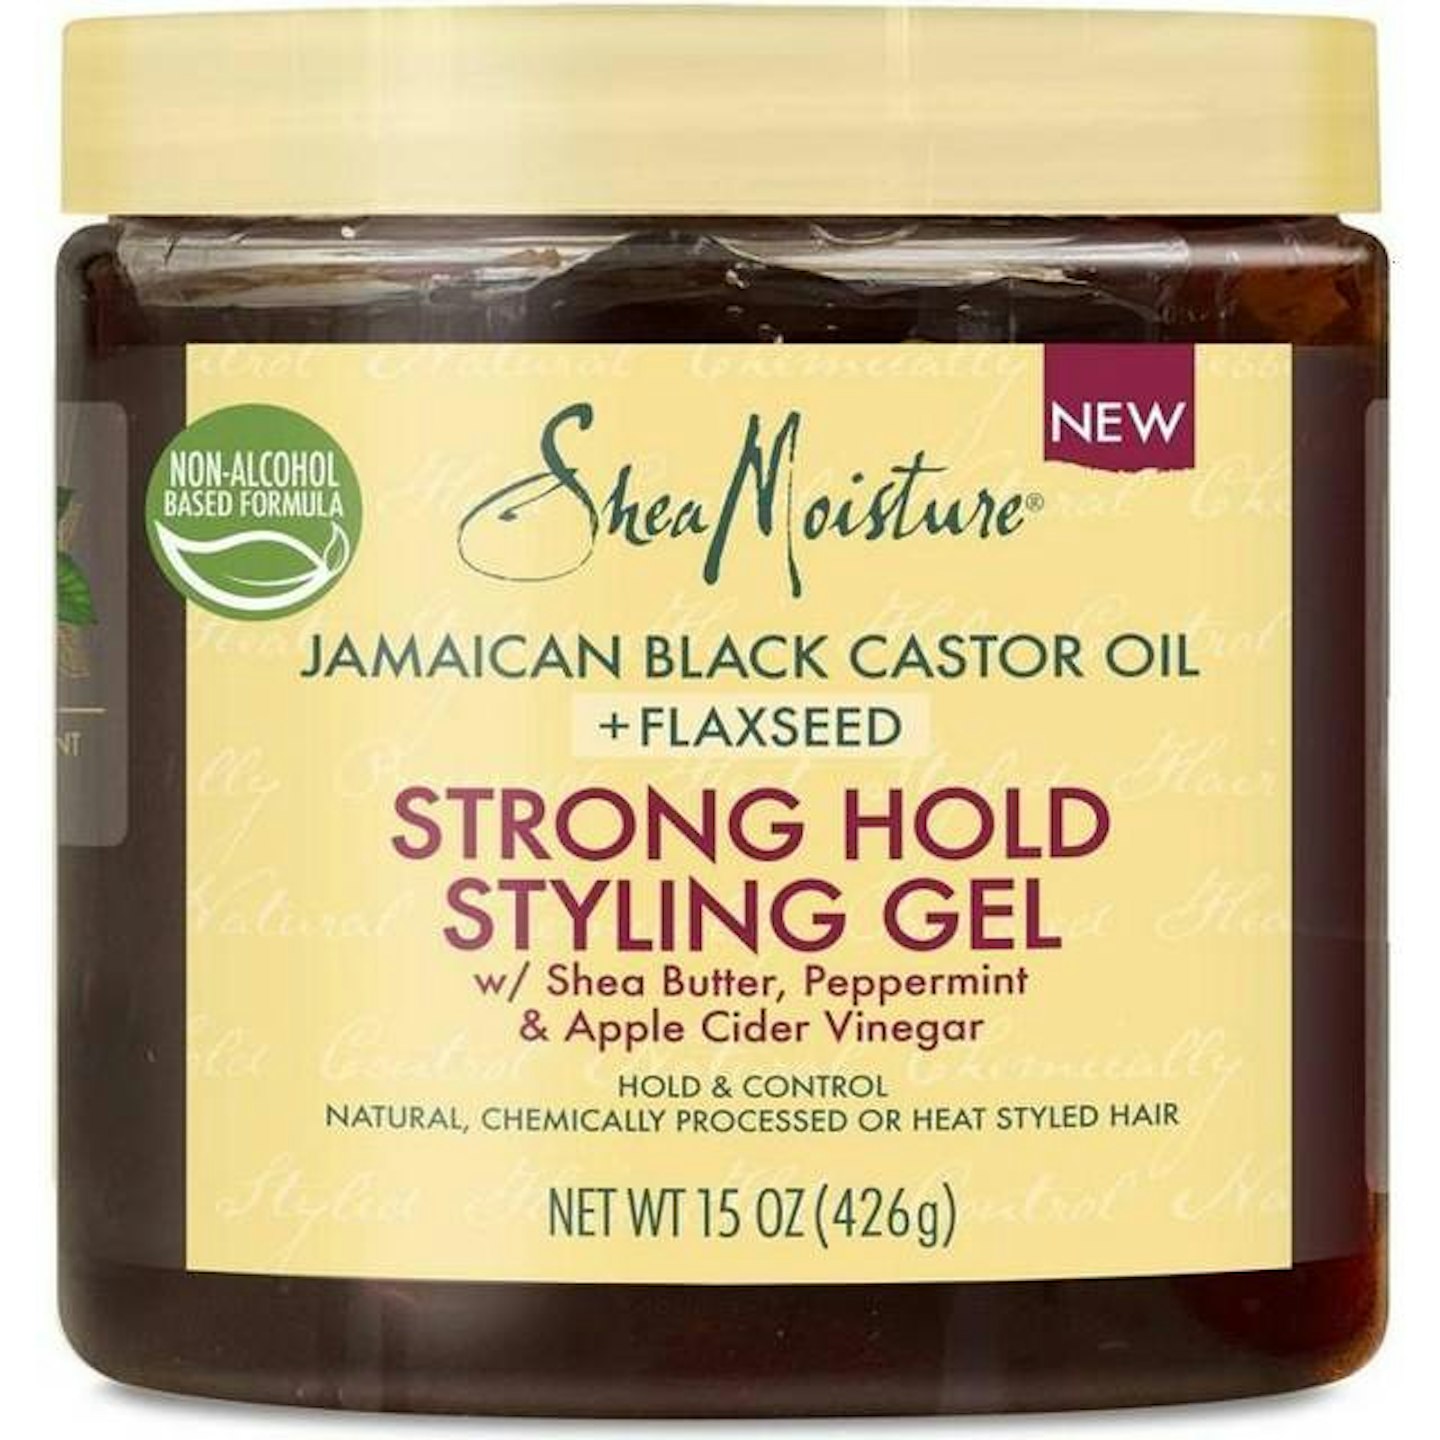 SheaMoisture Jamaican Black Castor Oil & Flaxseed Strong Hold Styling Gel